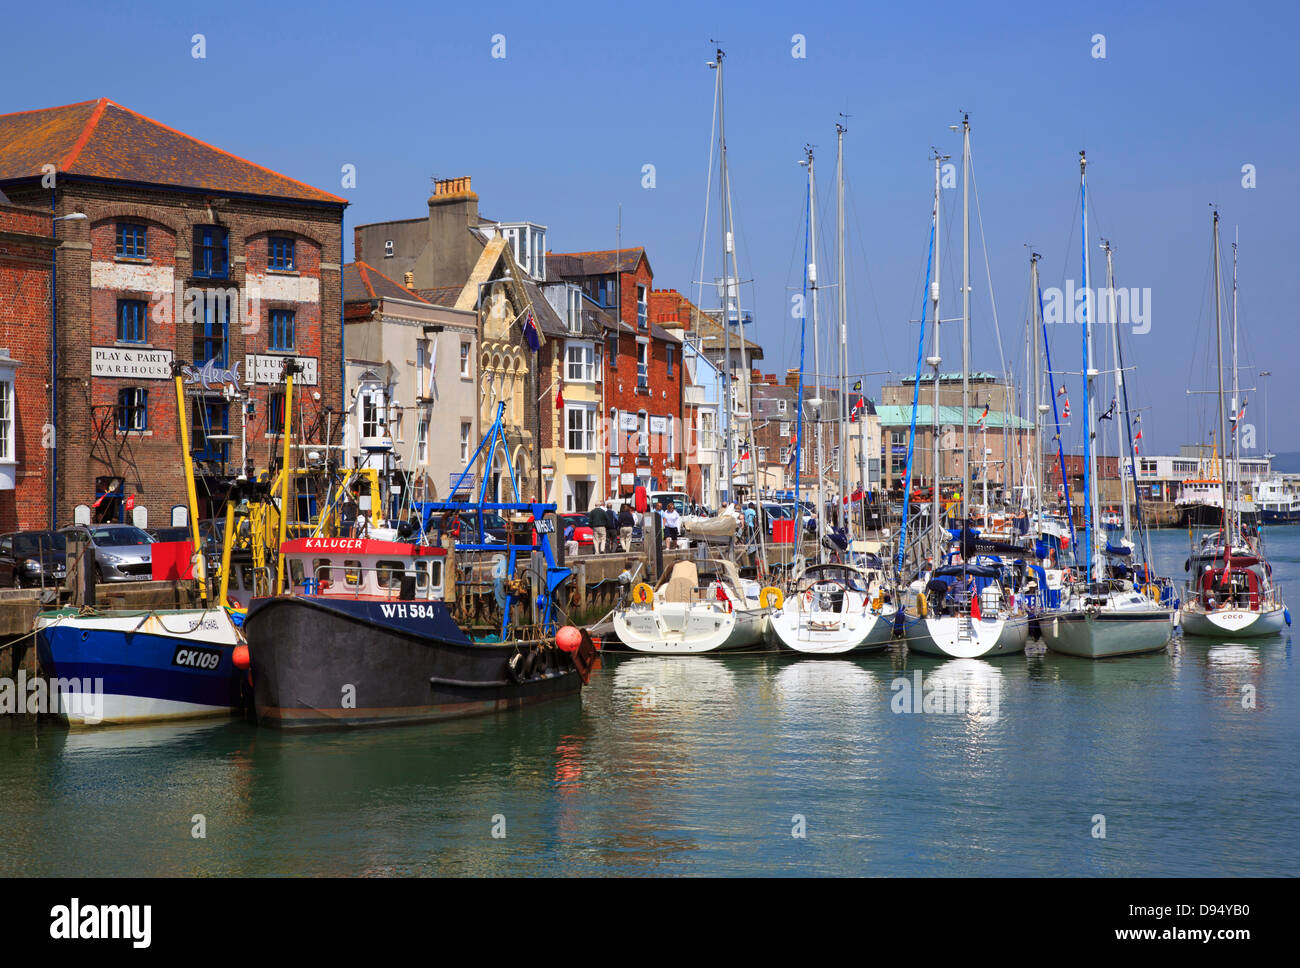 Boats in Weymouth Harbour Stock Photo